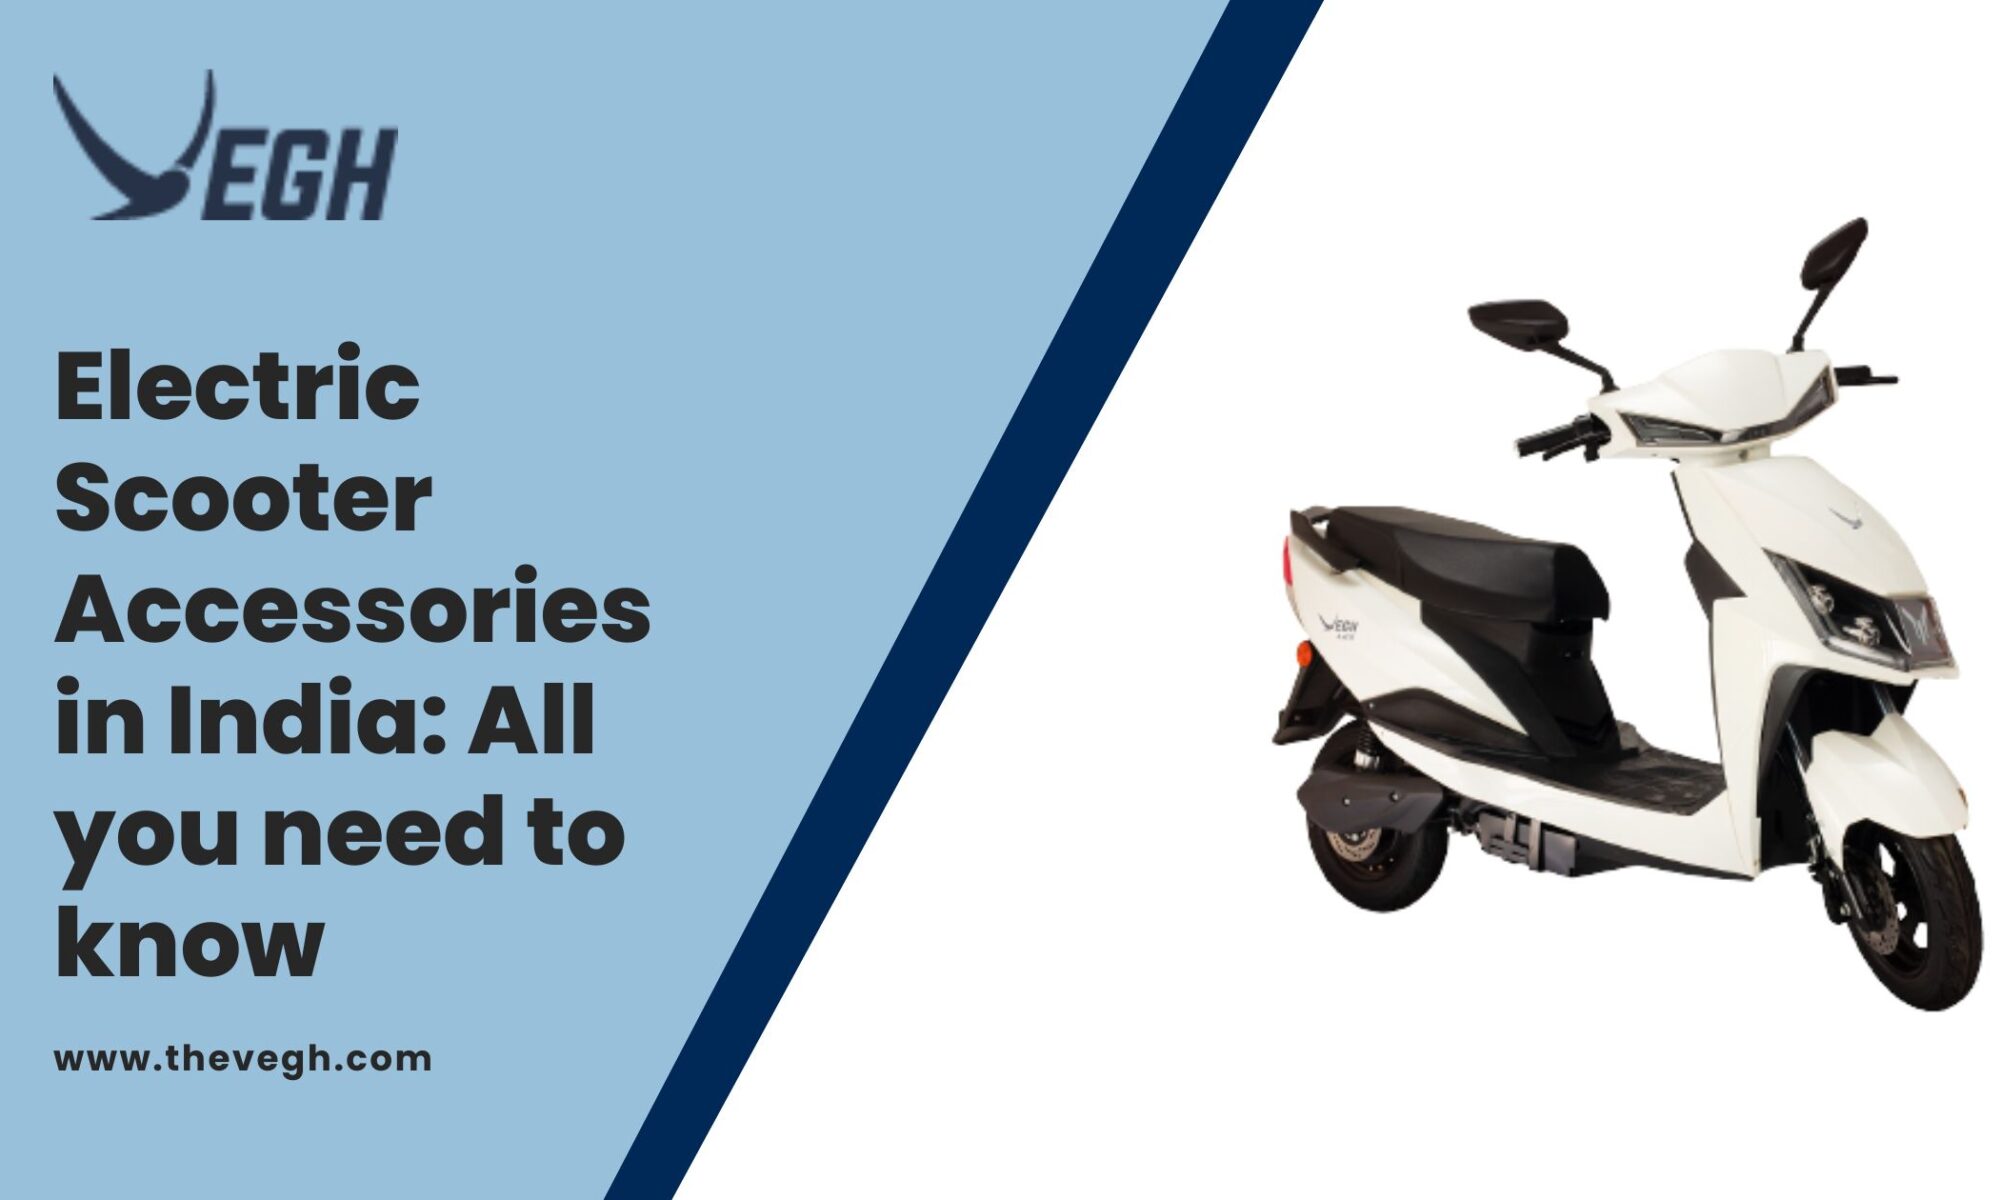 Electric Scooter Accessories in India: All you need to know